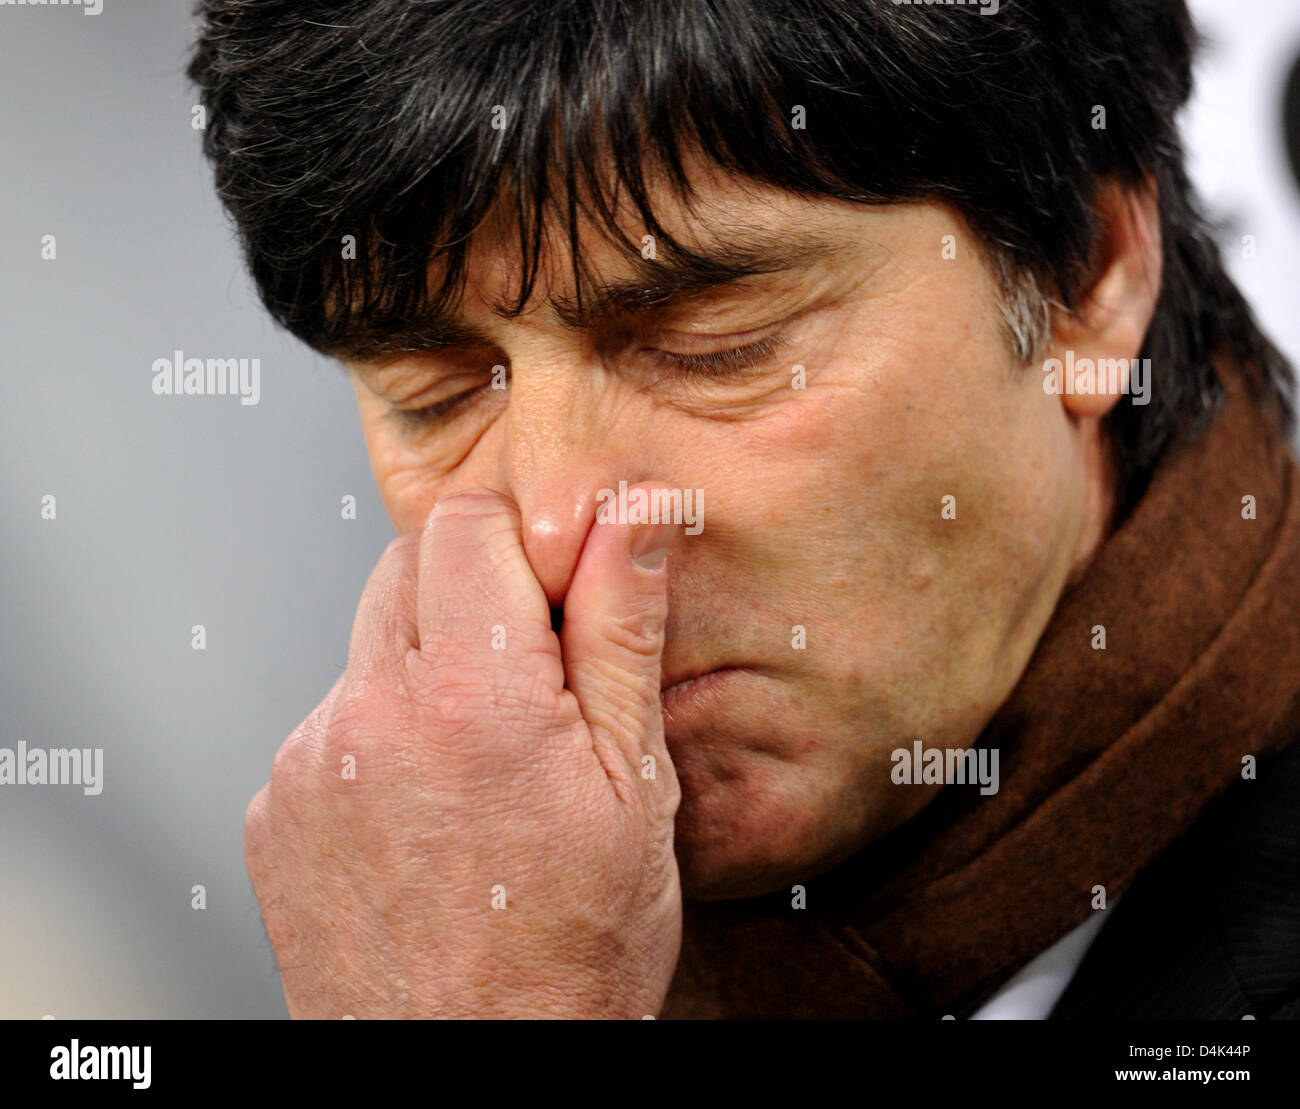 Germany?s head coach Joachim Loew watches the group 4 world cup qualifier Germany vs Liechtenstein at Zentralstadion in Leipzig, Germany, 28 March 2009. Photo: Peter Kneffel Stock Photo